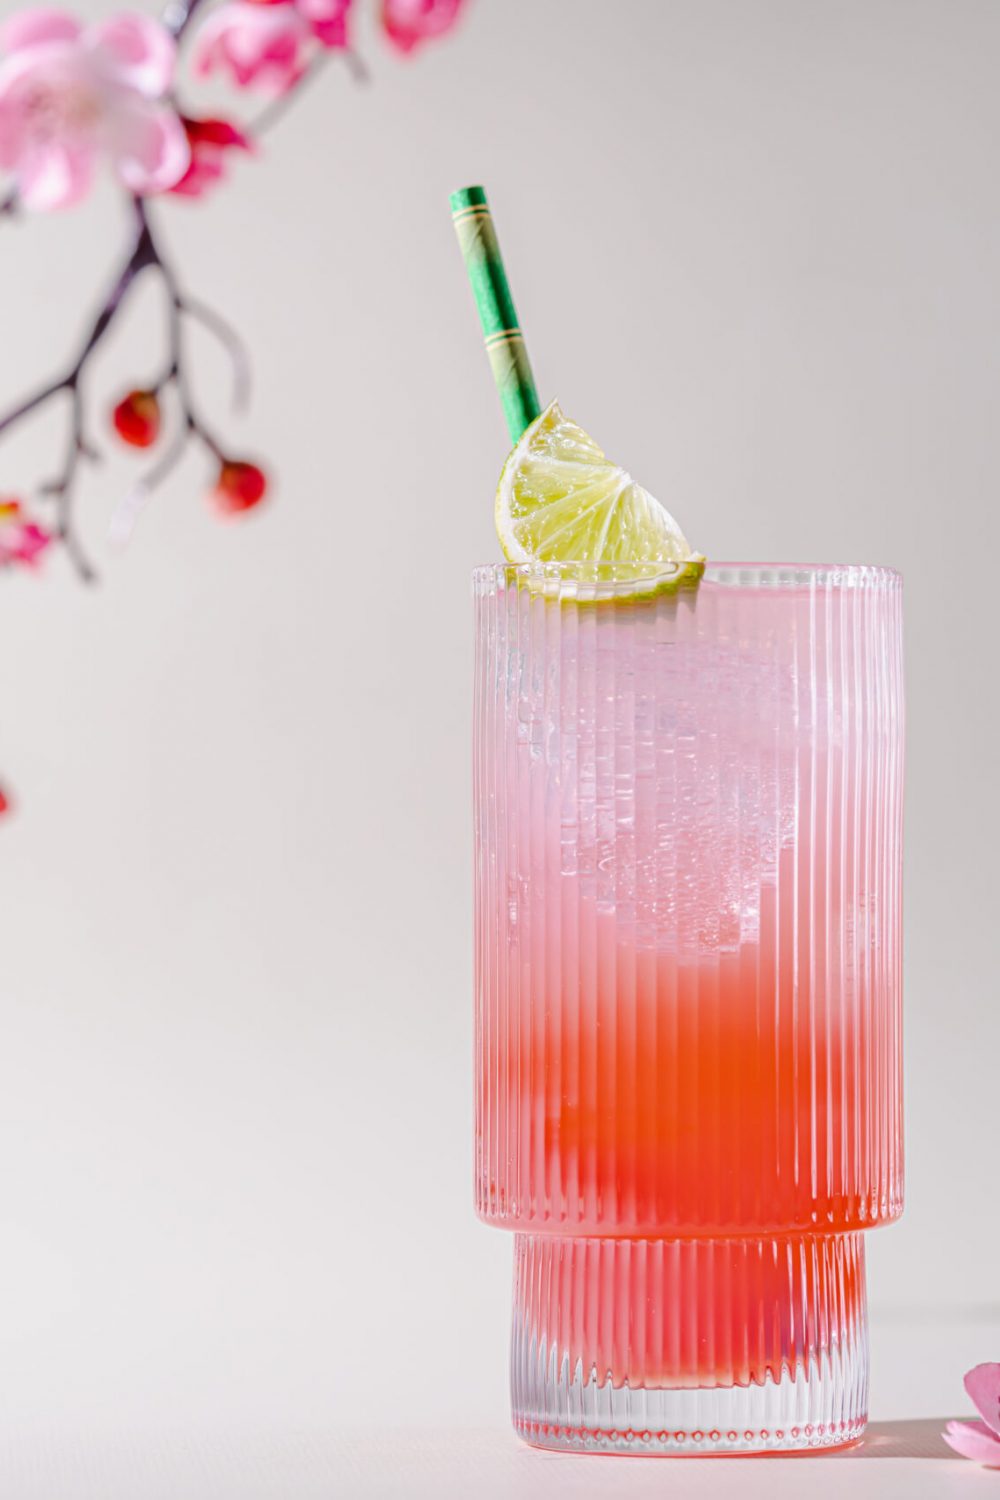 Summer refreshing drink. Light pink rose cocktail on a white background with spring flowers.